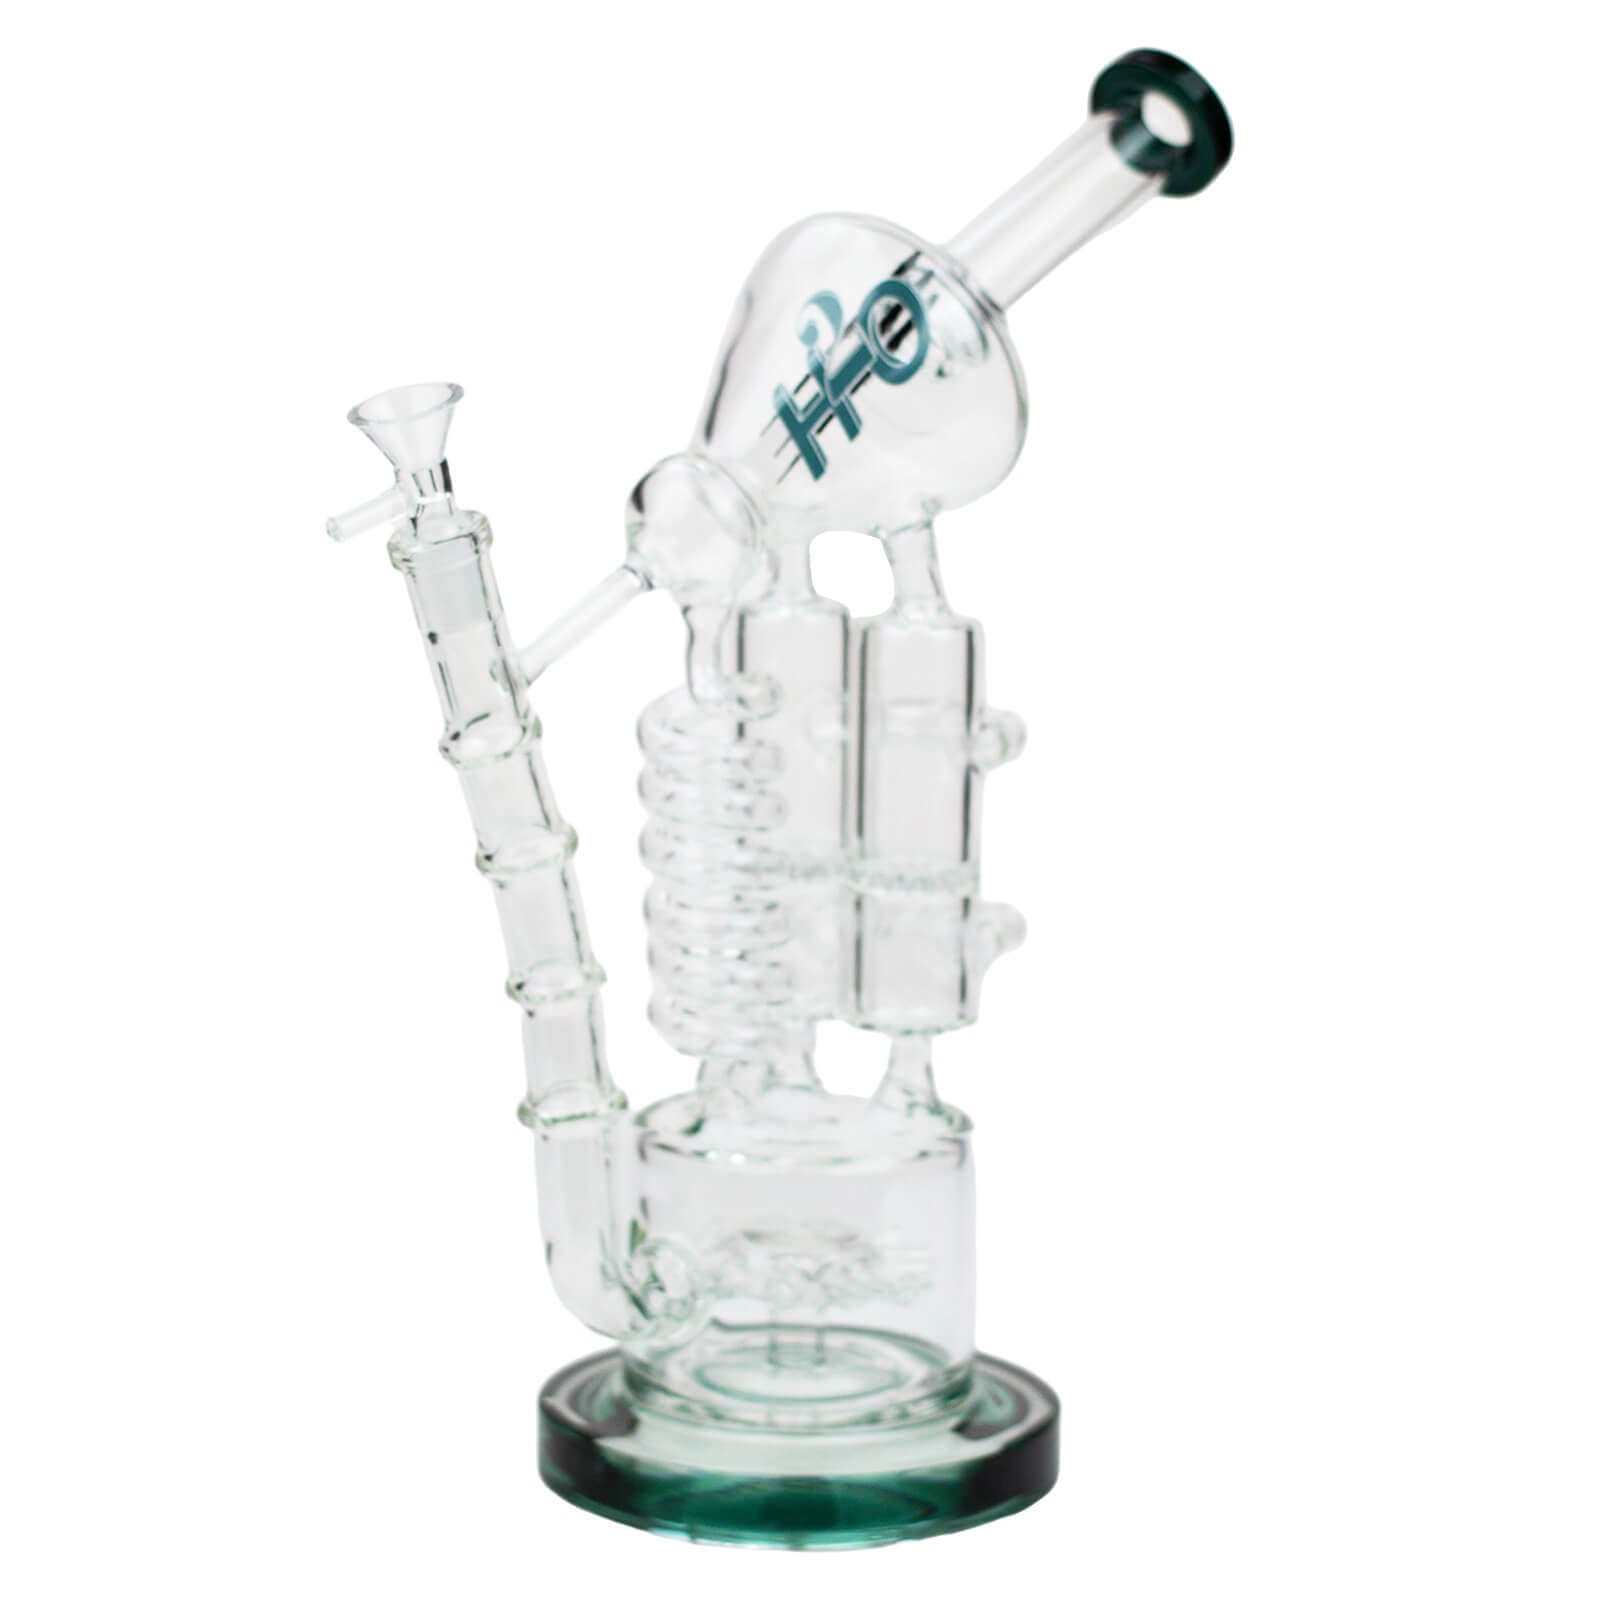 12" H2O Coil Glass Water Recycle Bong